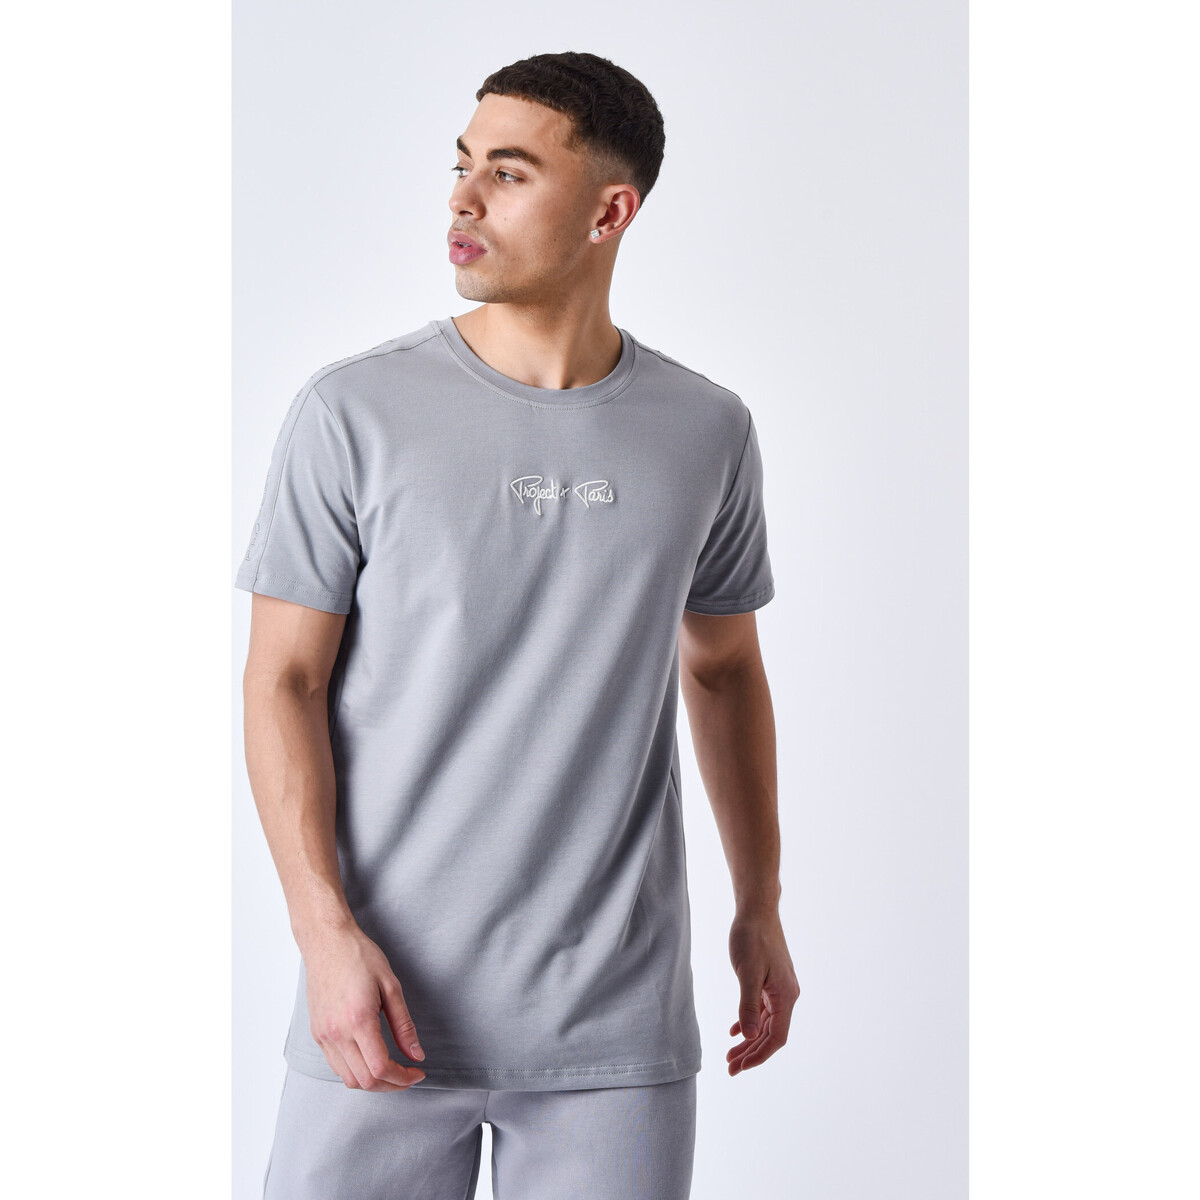 Vêtements Homme Nike Sportswear is bringing EM back with their classic OG Nike Air Project X Paris Tee Shirt 2310027 Gris